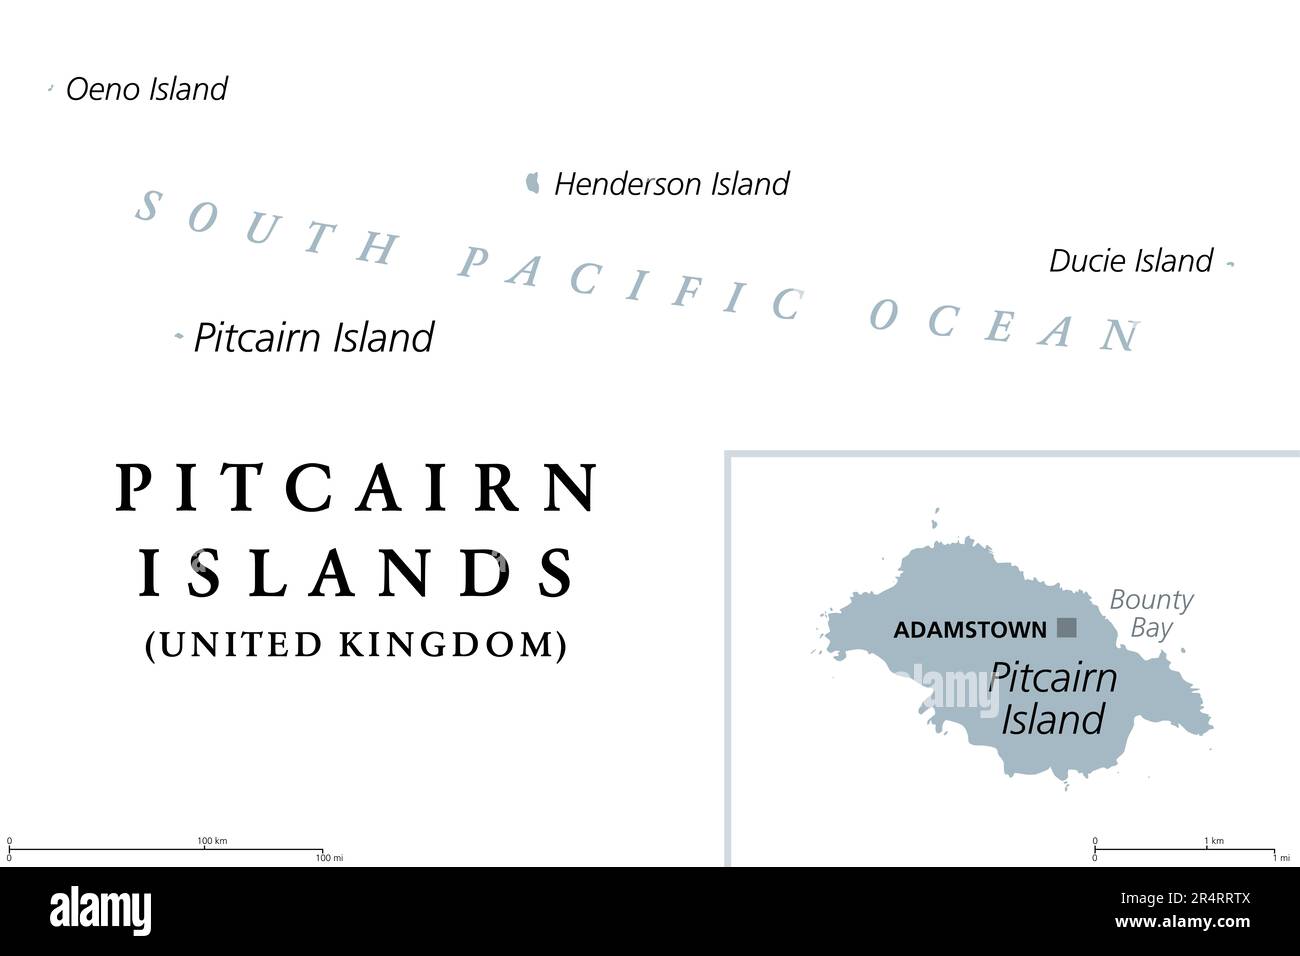 Pitcairn Islands, British Overseas Territory, gray political map. Pitcairn, Henderson, Ducie and Oeno Islands. South Pacific volcanic island group. Stock Photo